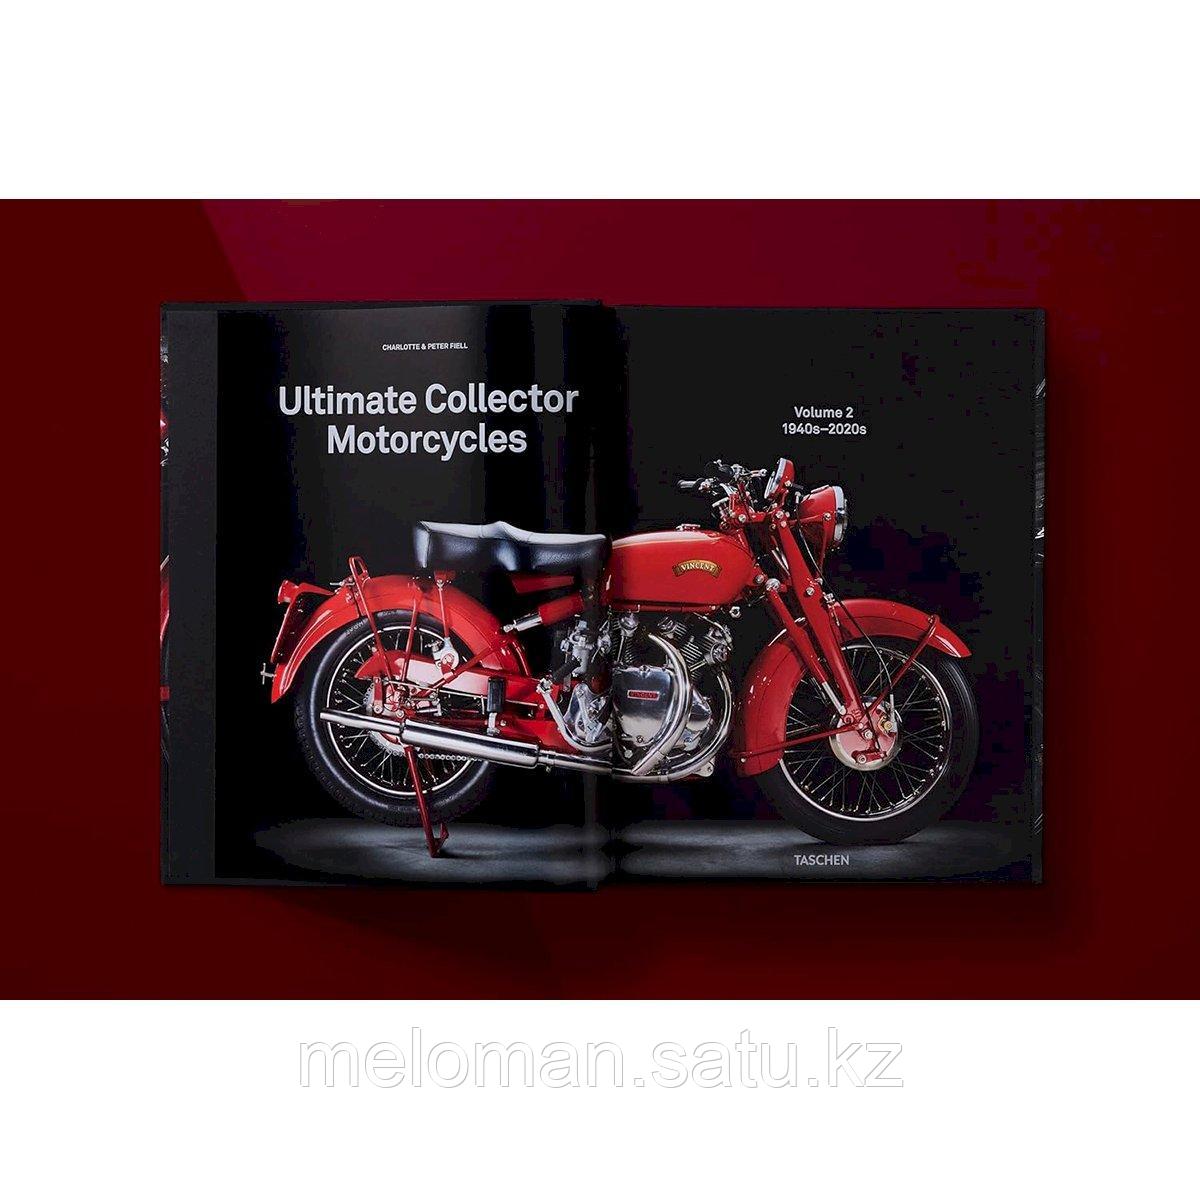 Ultimate Collector Motorcycles - фото 2 - id-p116238983